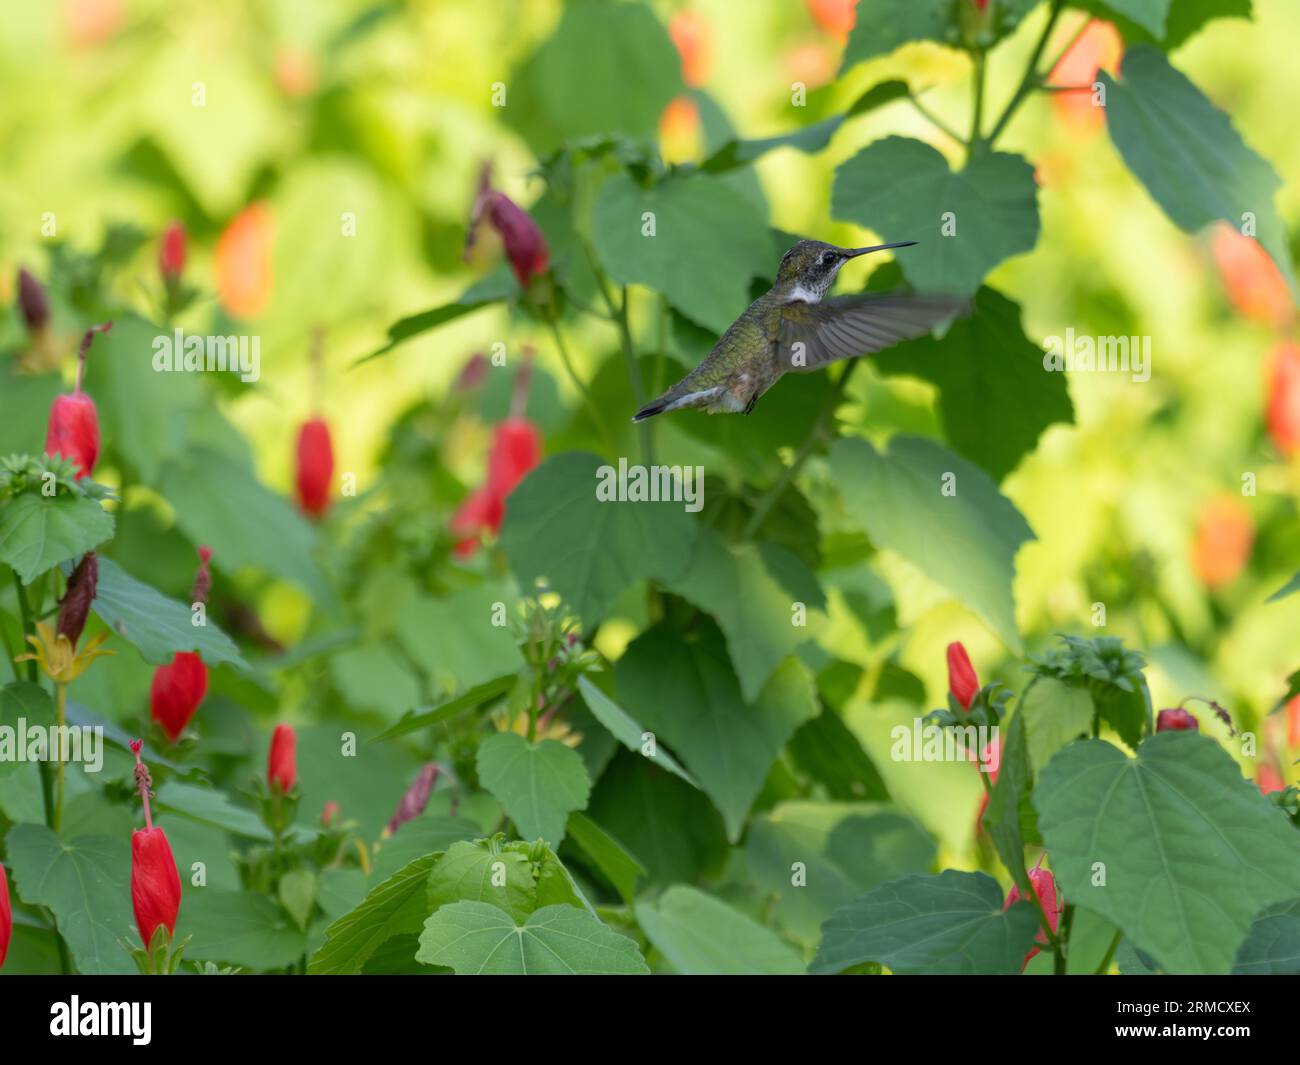 Female Ruby-throated hummingbird hovering around blooming Turk's cap plants. Photographed with a shallow depth of field in Texas. Stock Photo